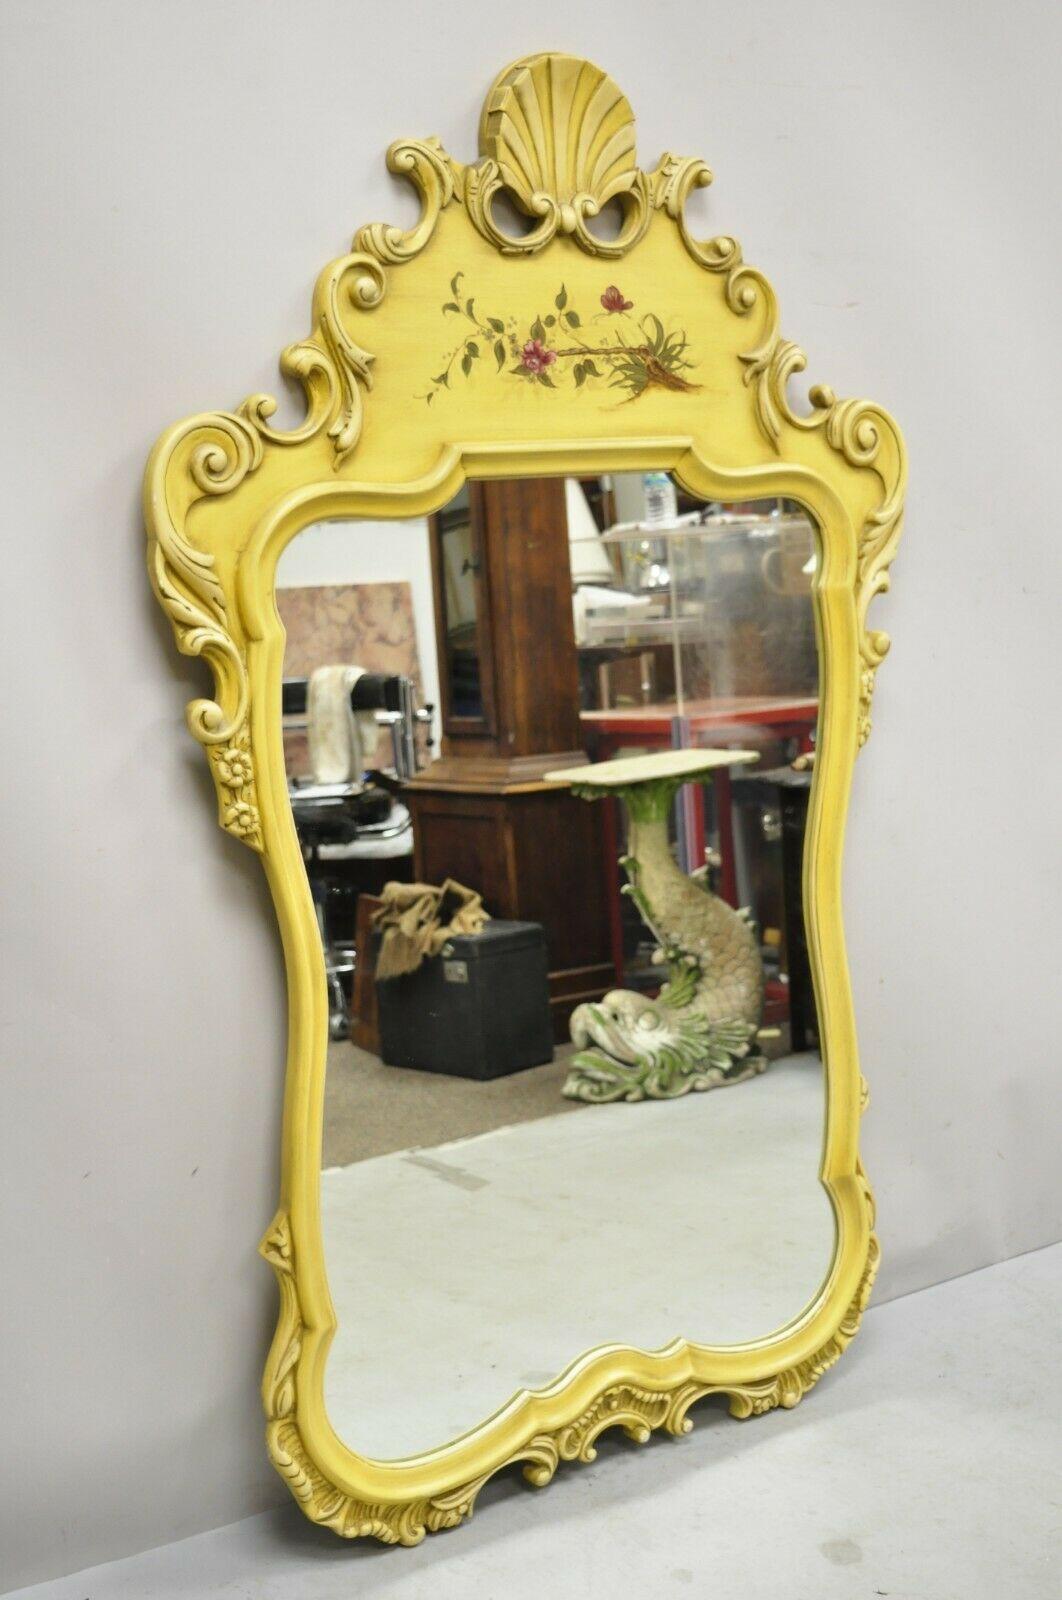 Vintage Yellow Chinoiserie shell carved wall mirror by Union National. Item features hand painted floral detail, shell carved pediment, original yellow finish, nicely carved details, quality American craftmanship, great style and form. Circa. Mid